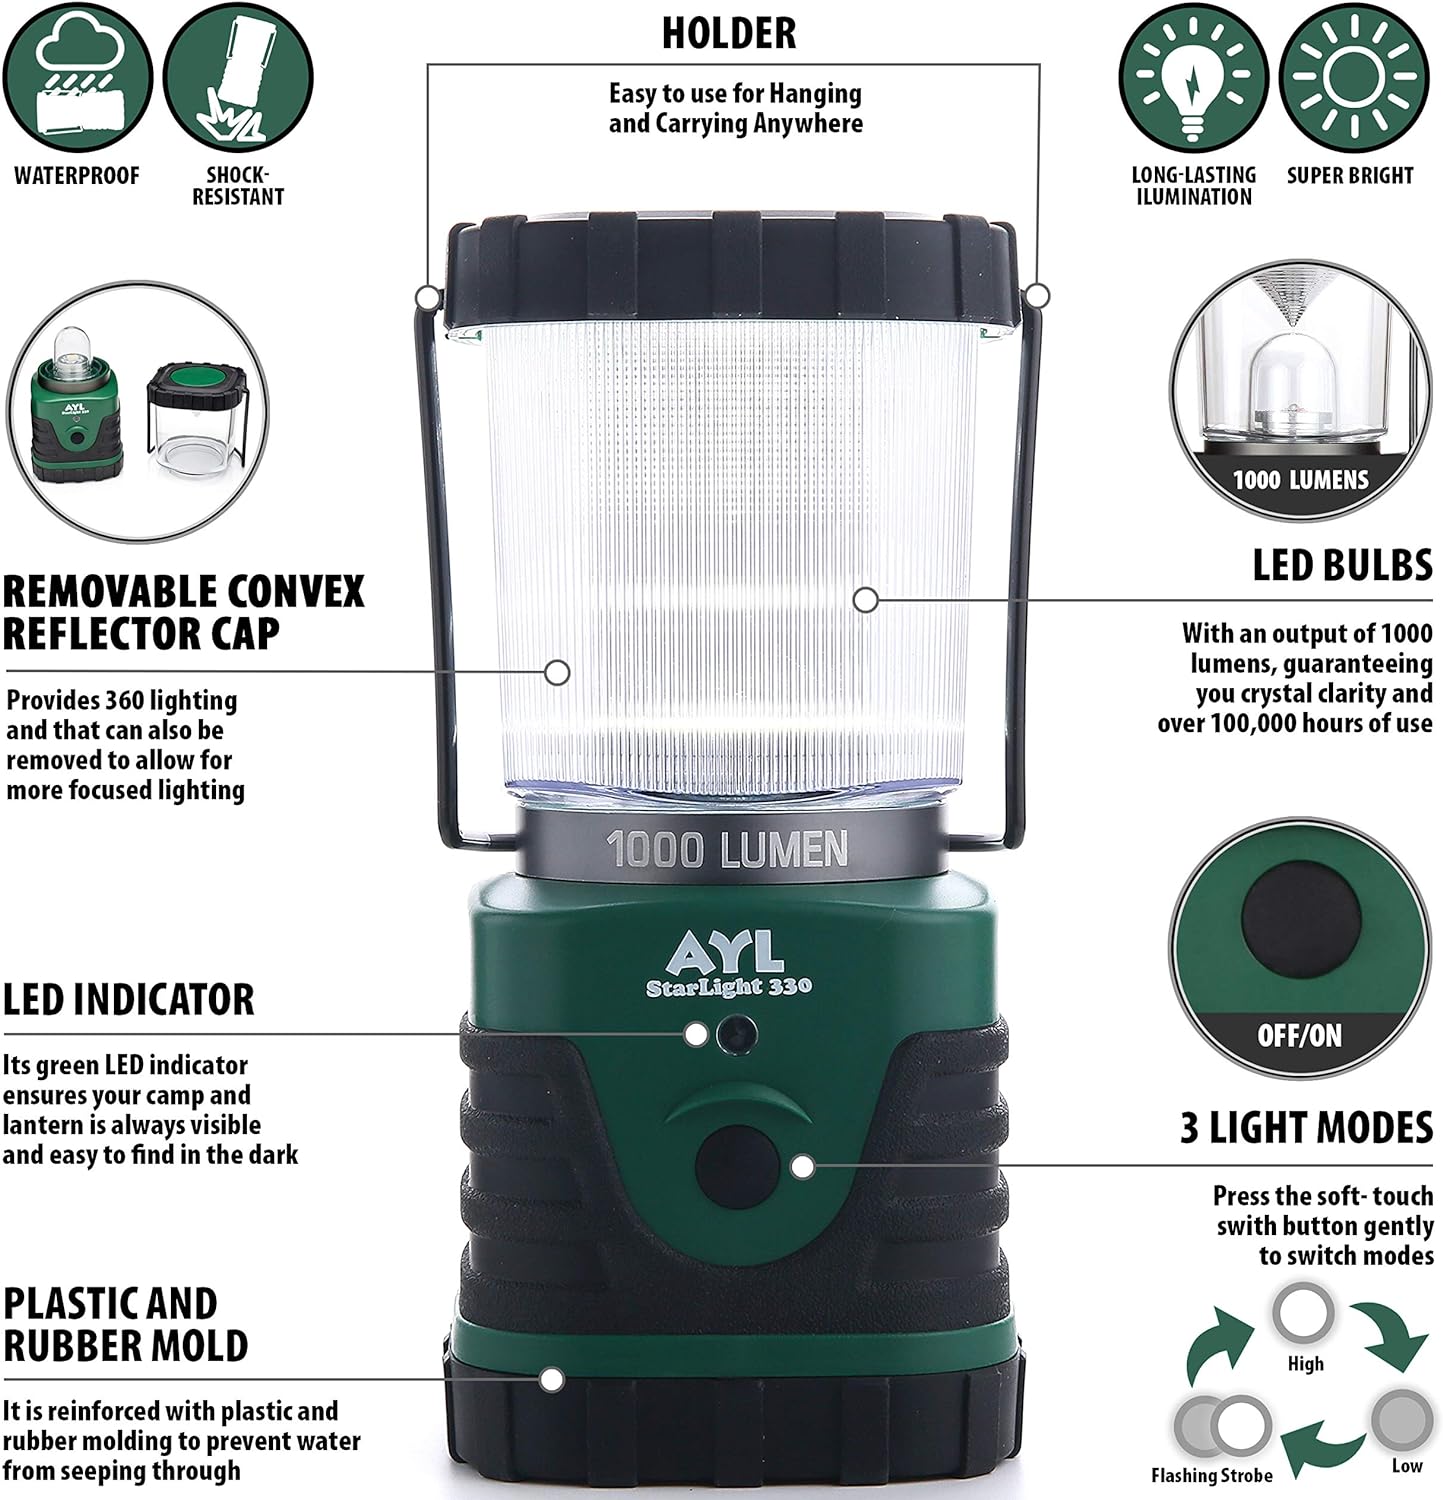 (2 Pack) AYL Starlight 700 - Water Resistant - Shock Proof - Long Lasting Up to 6 Days - 1300 Lumens Ultra Bright LED Lantern - Perfect Lantern for Hiking, Camping, Emergencies, Hurricanes, Outages